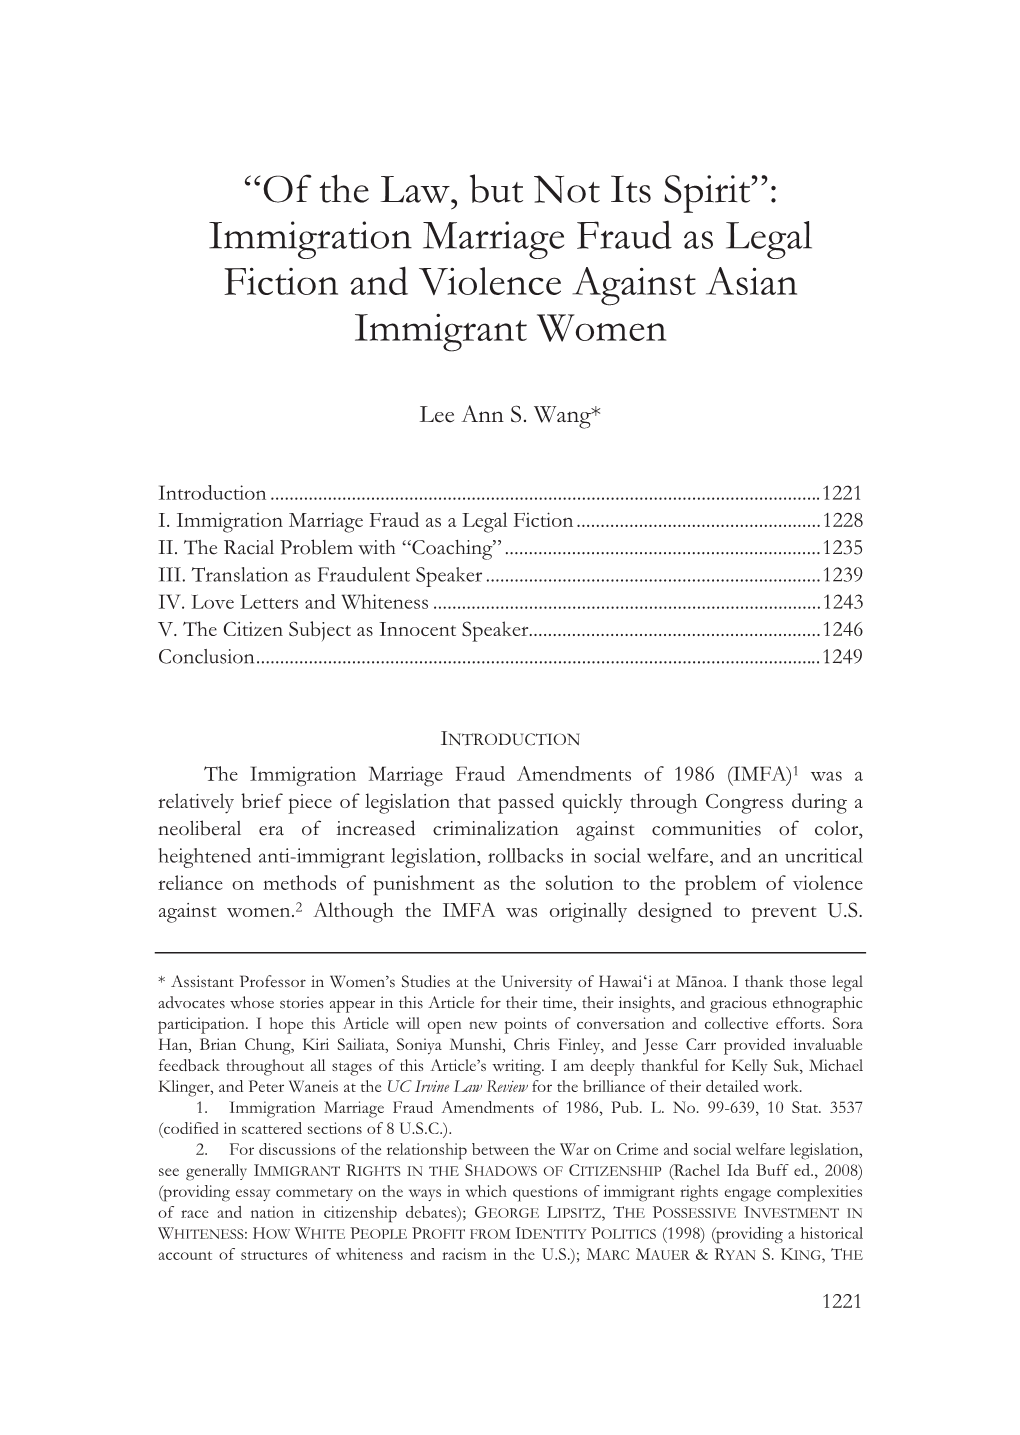 “Of the Law, but Not Its Spirit”: Immigration Marriage Fraud As Legal Fiction and Violence Against Asian Immigrant Women